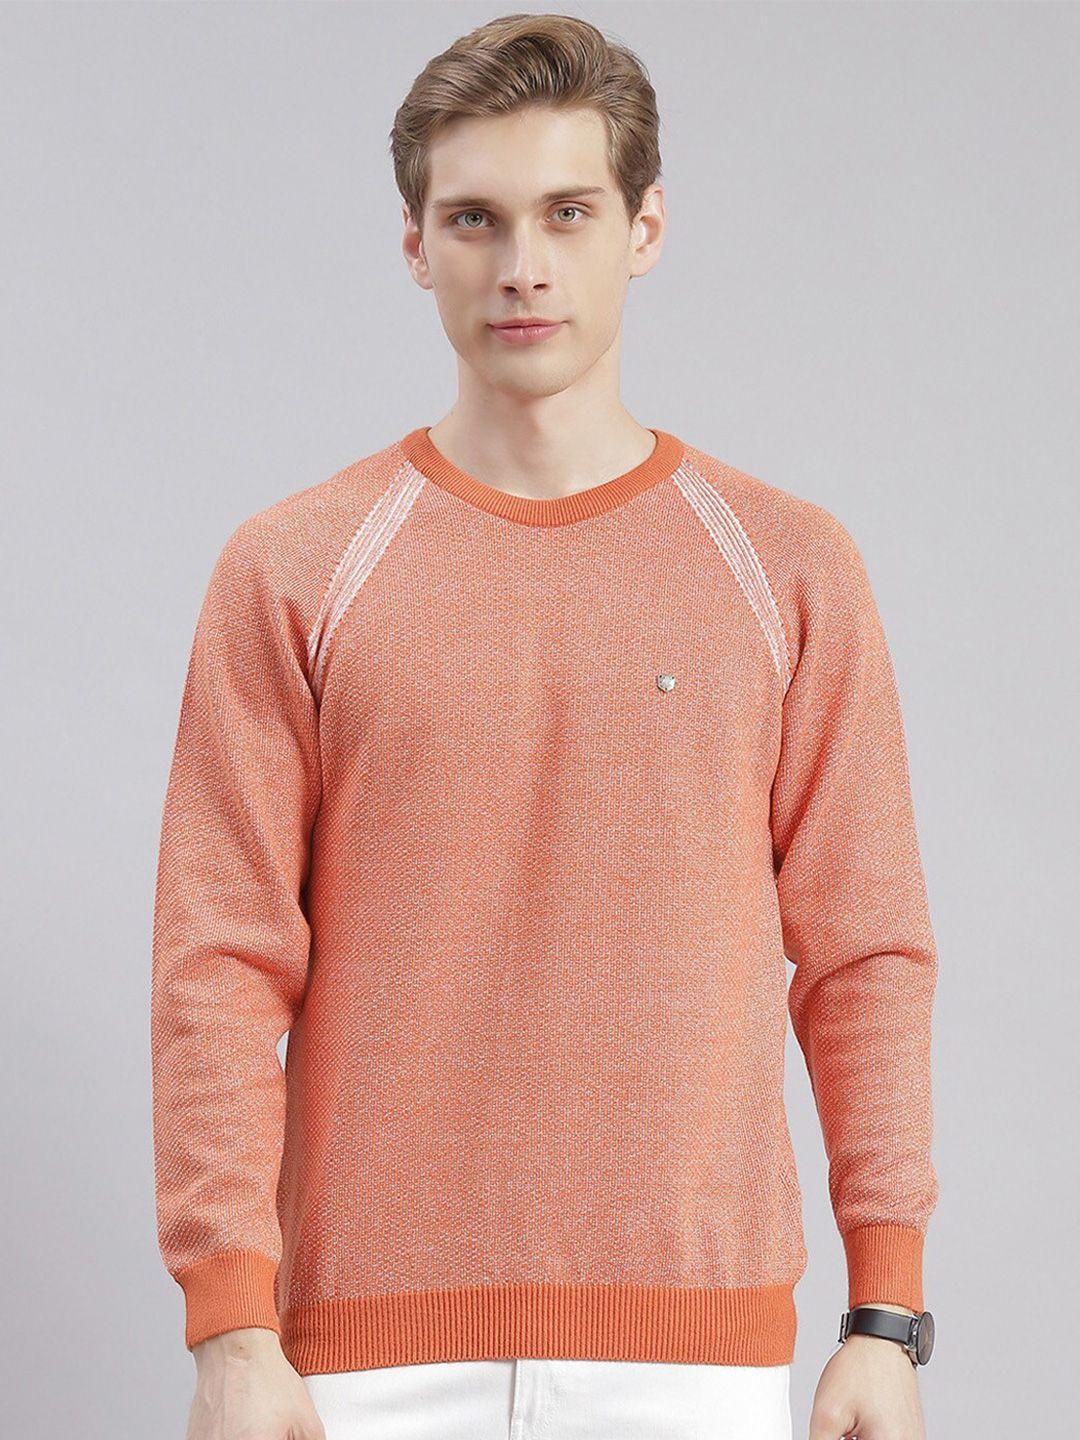 monte carlo round neck long sleeves pullover